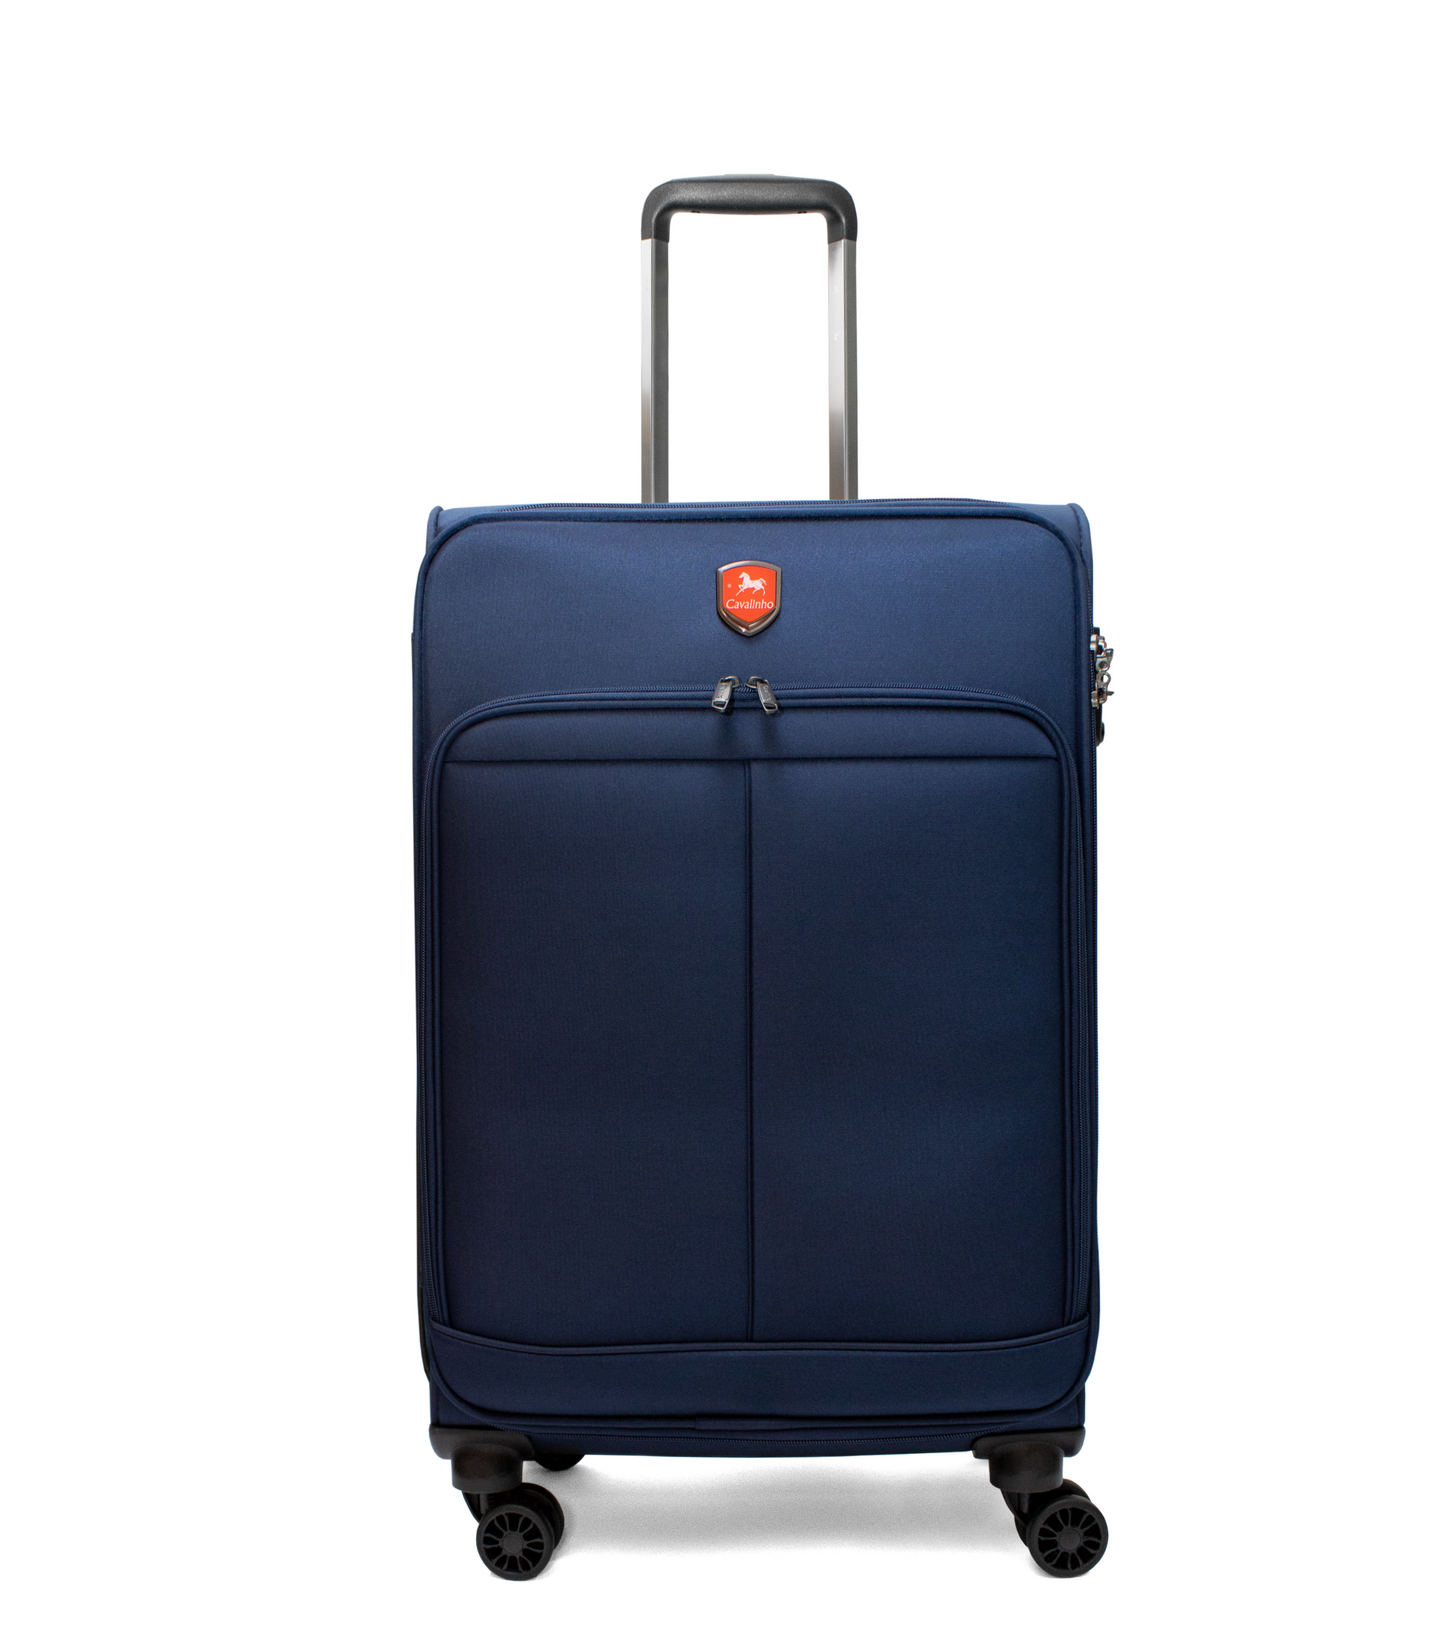 Cavalinho Check-in Softside Luggage (24" or 28") - 24 inch SteelBlue - 68020003.03.24_1